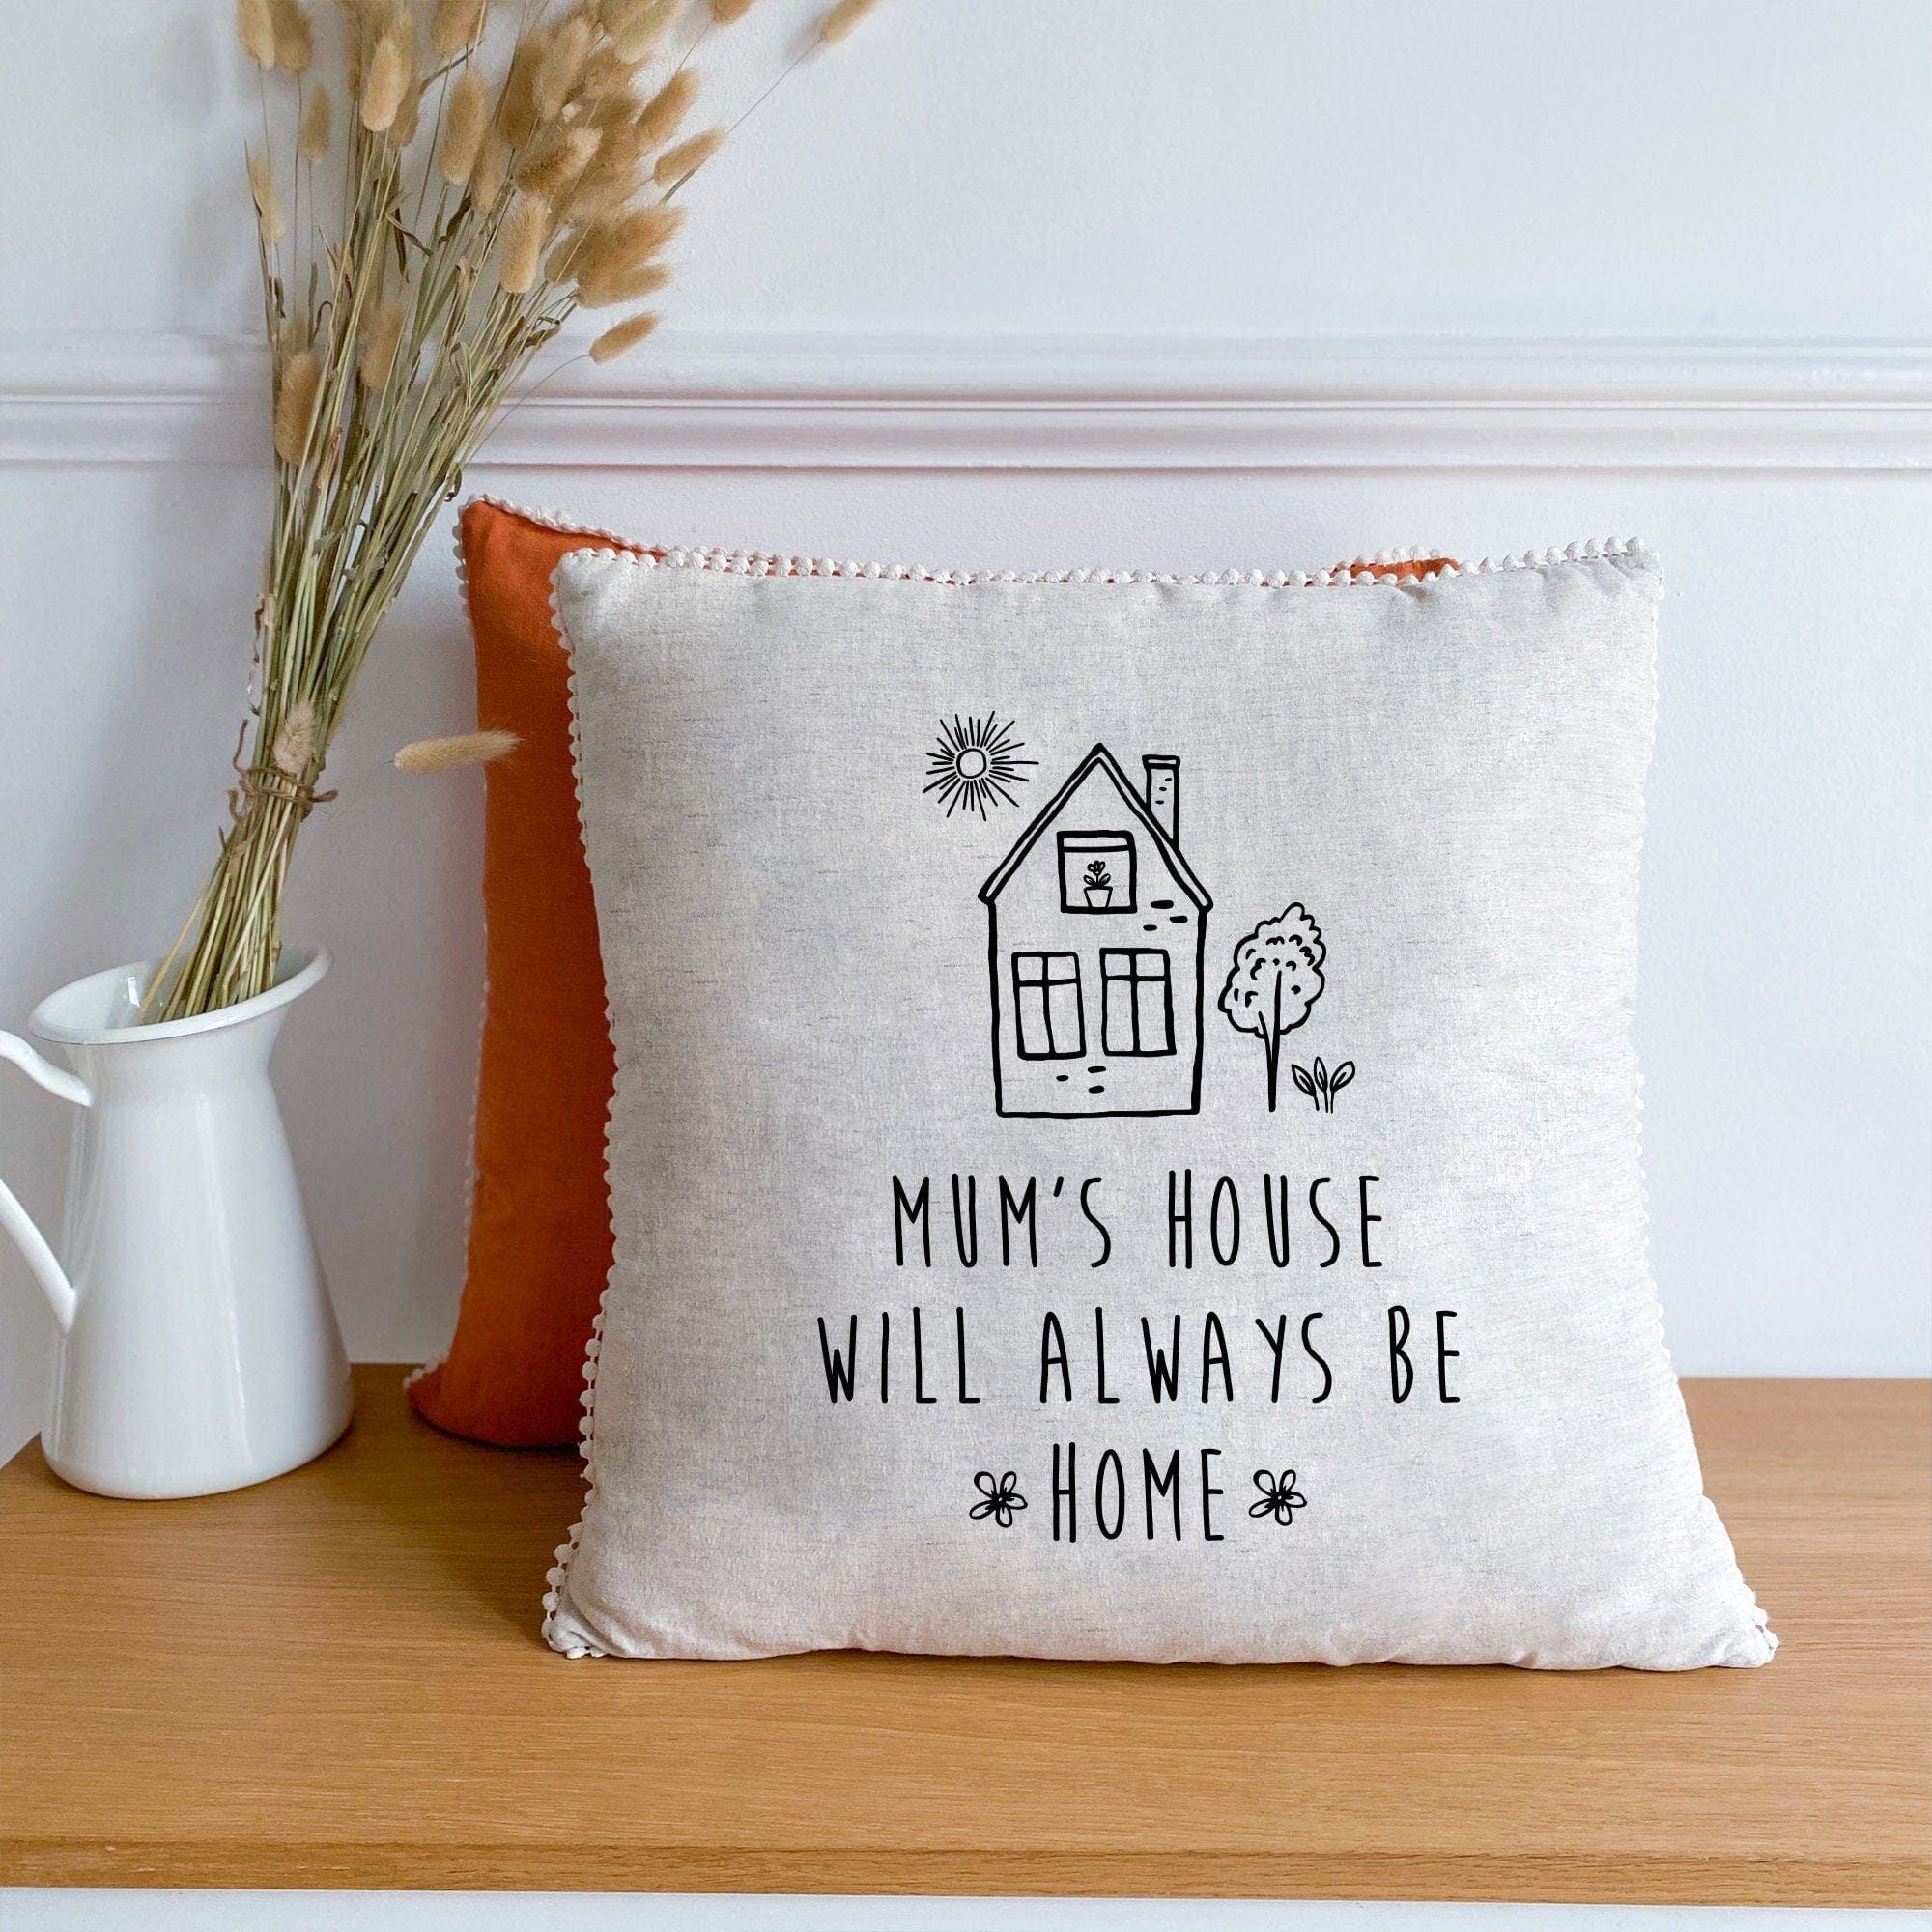 Mum's house will always be home linen cushion with mini flower trim, Mother's Day gift for mummy